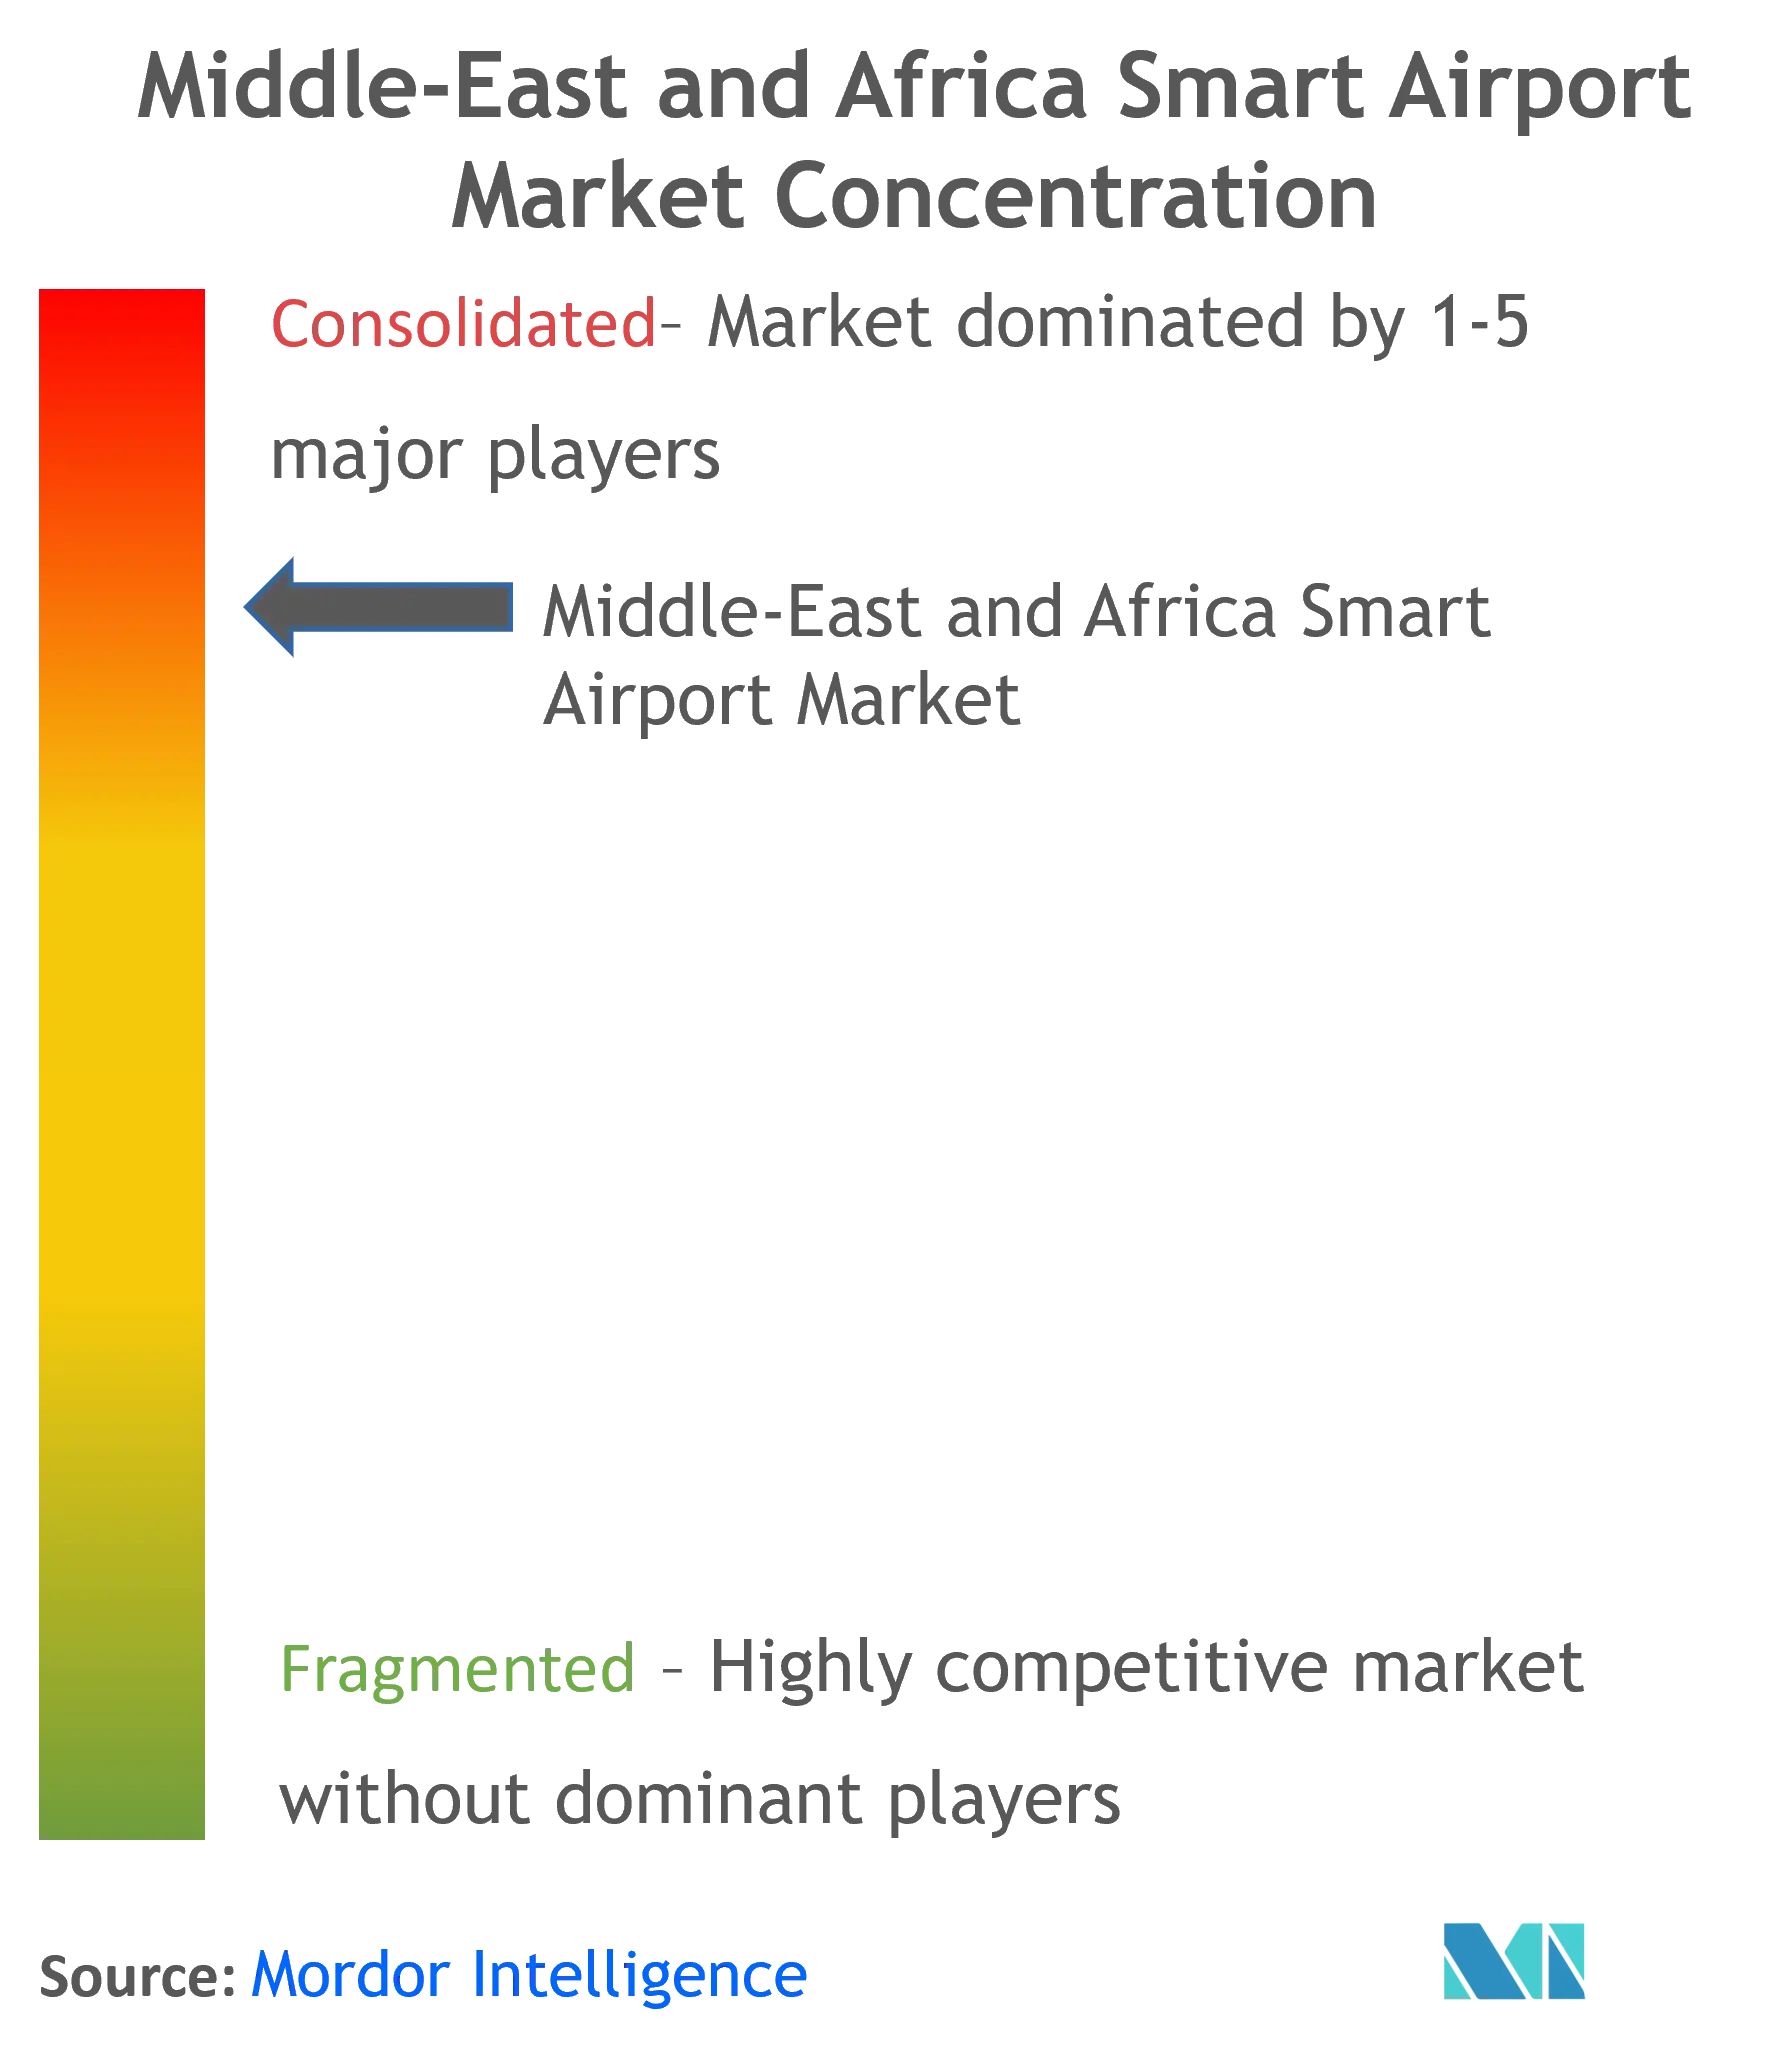 Middle-East And Africa Smart Airport Market Concentration